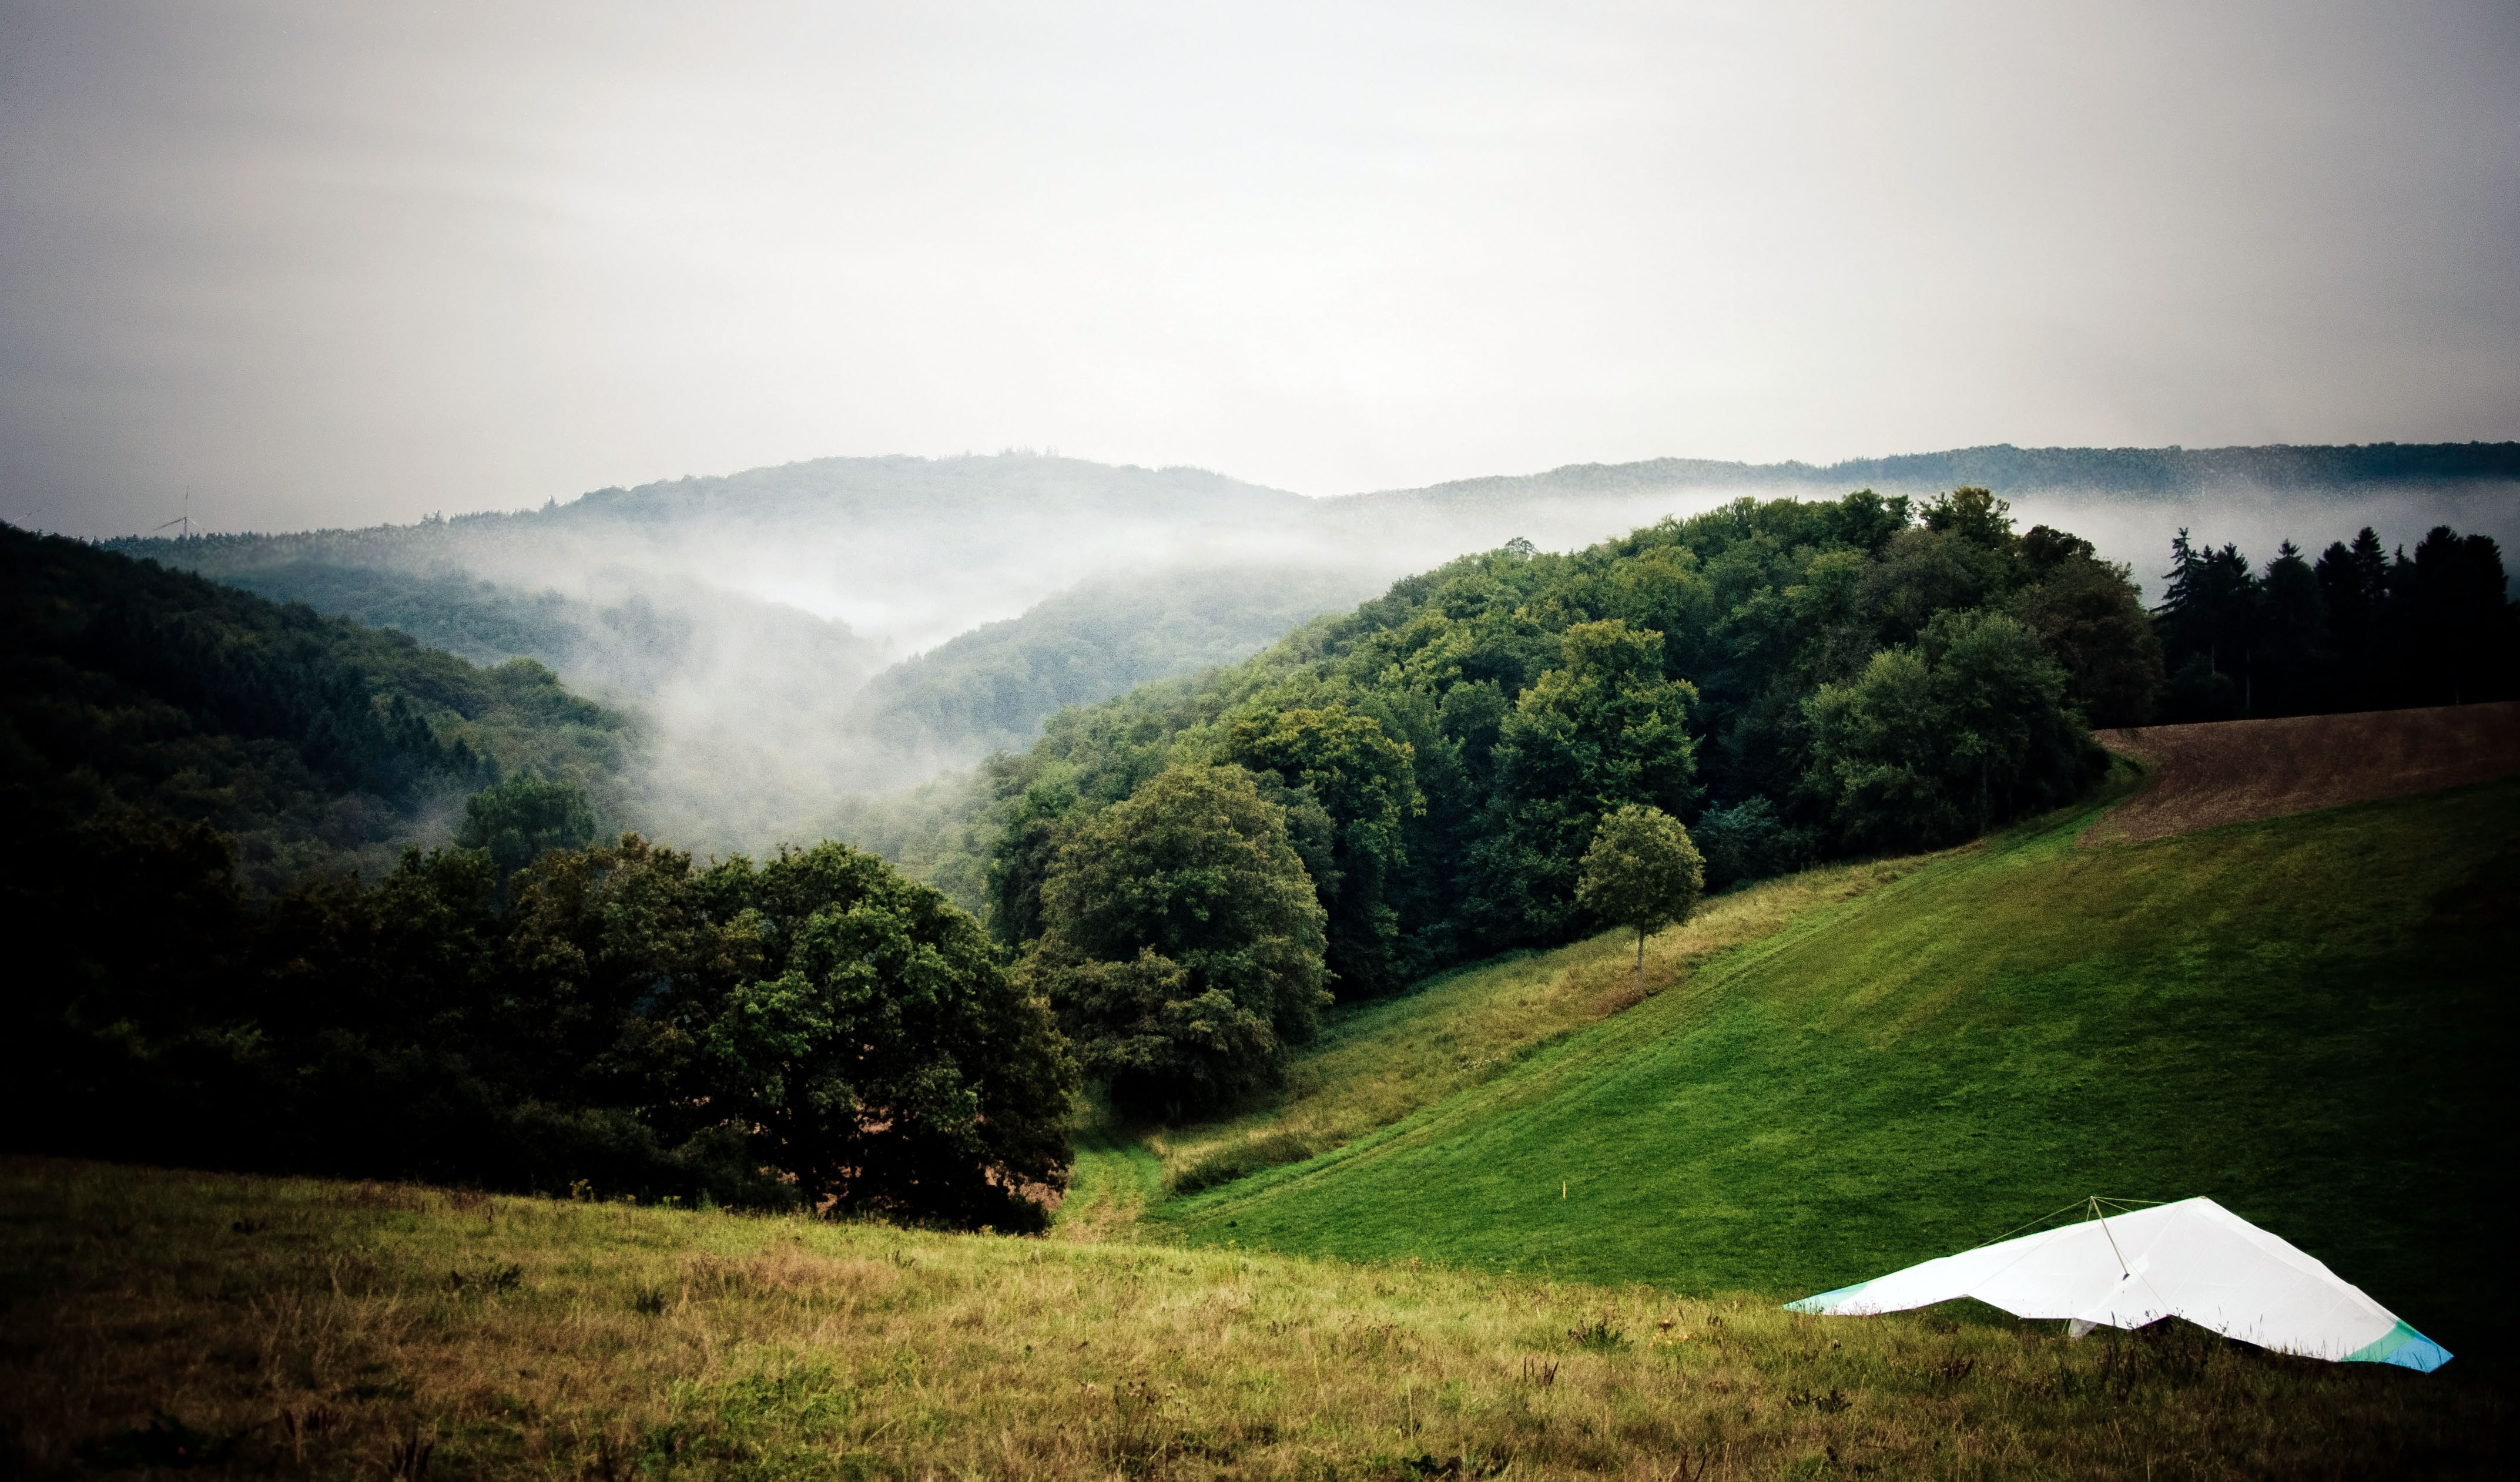 Hang Gliding in Tennessee